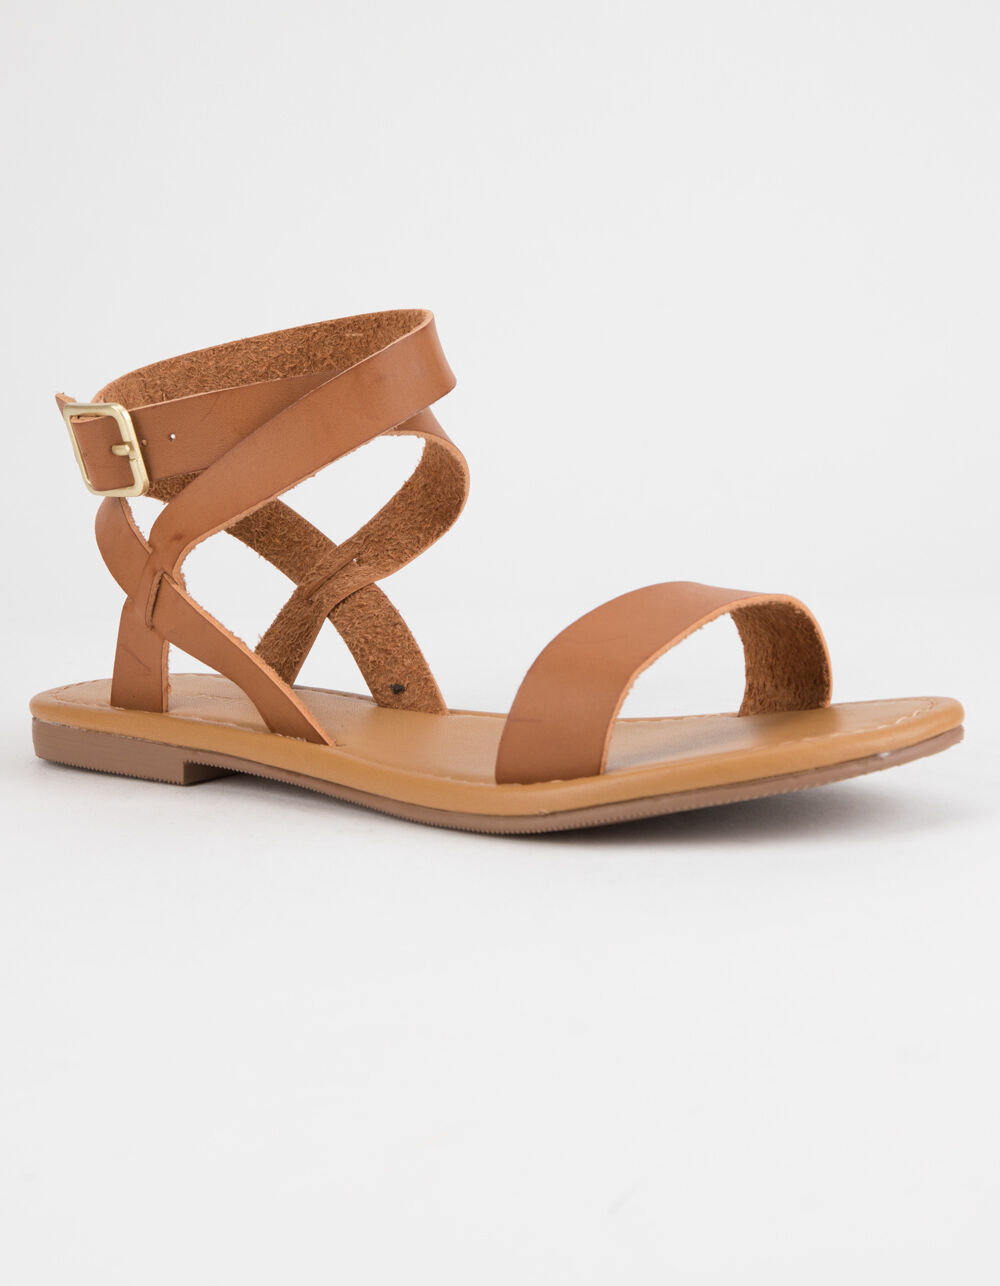 CITY CLASSIFIED Basic Ankle Wrap Womens Sandals - TAN | Tillys